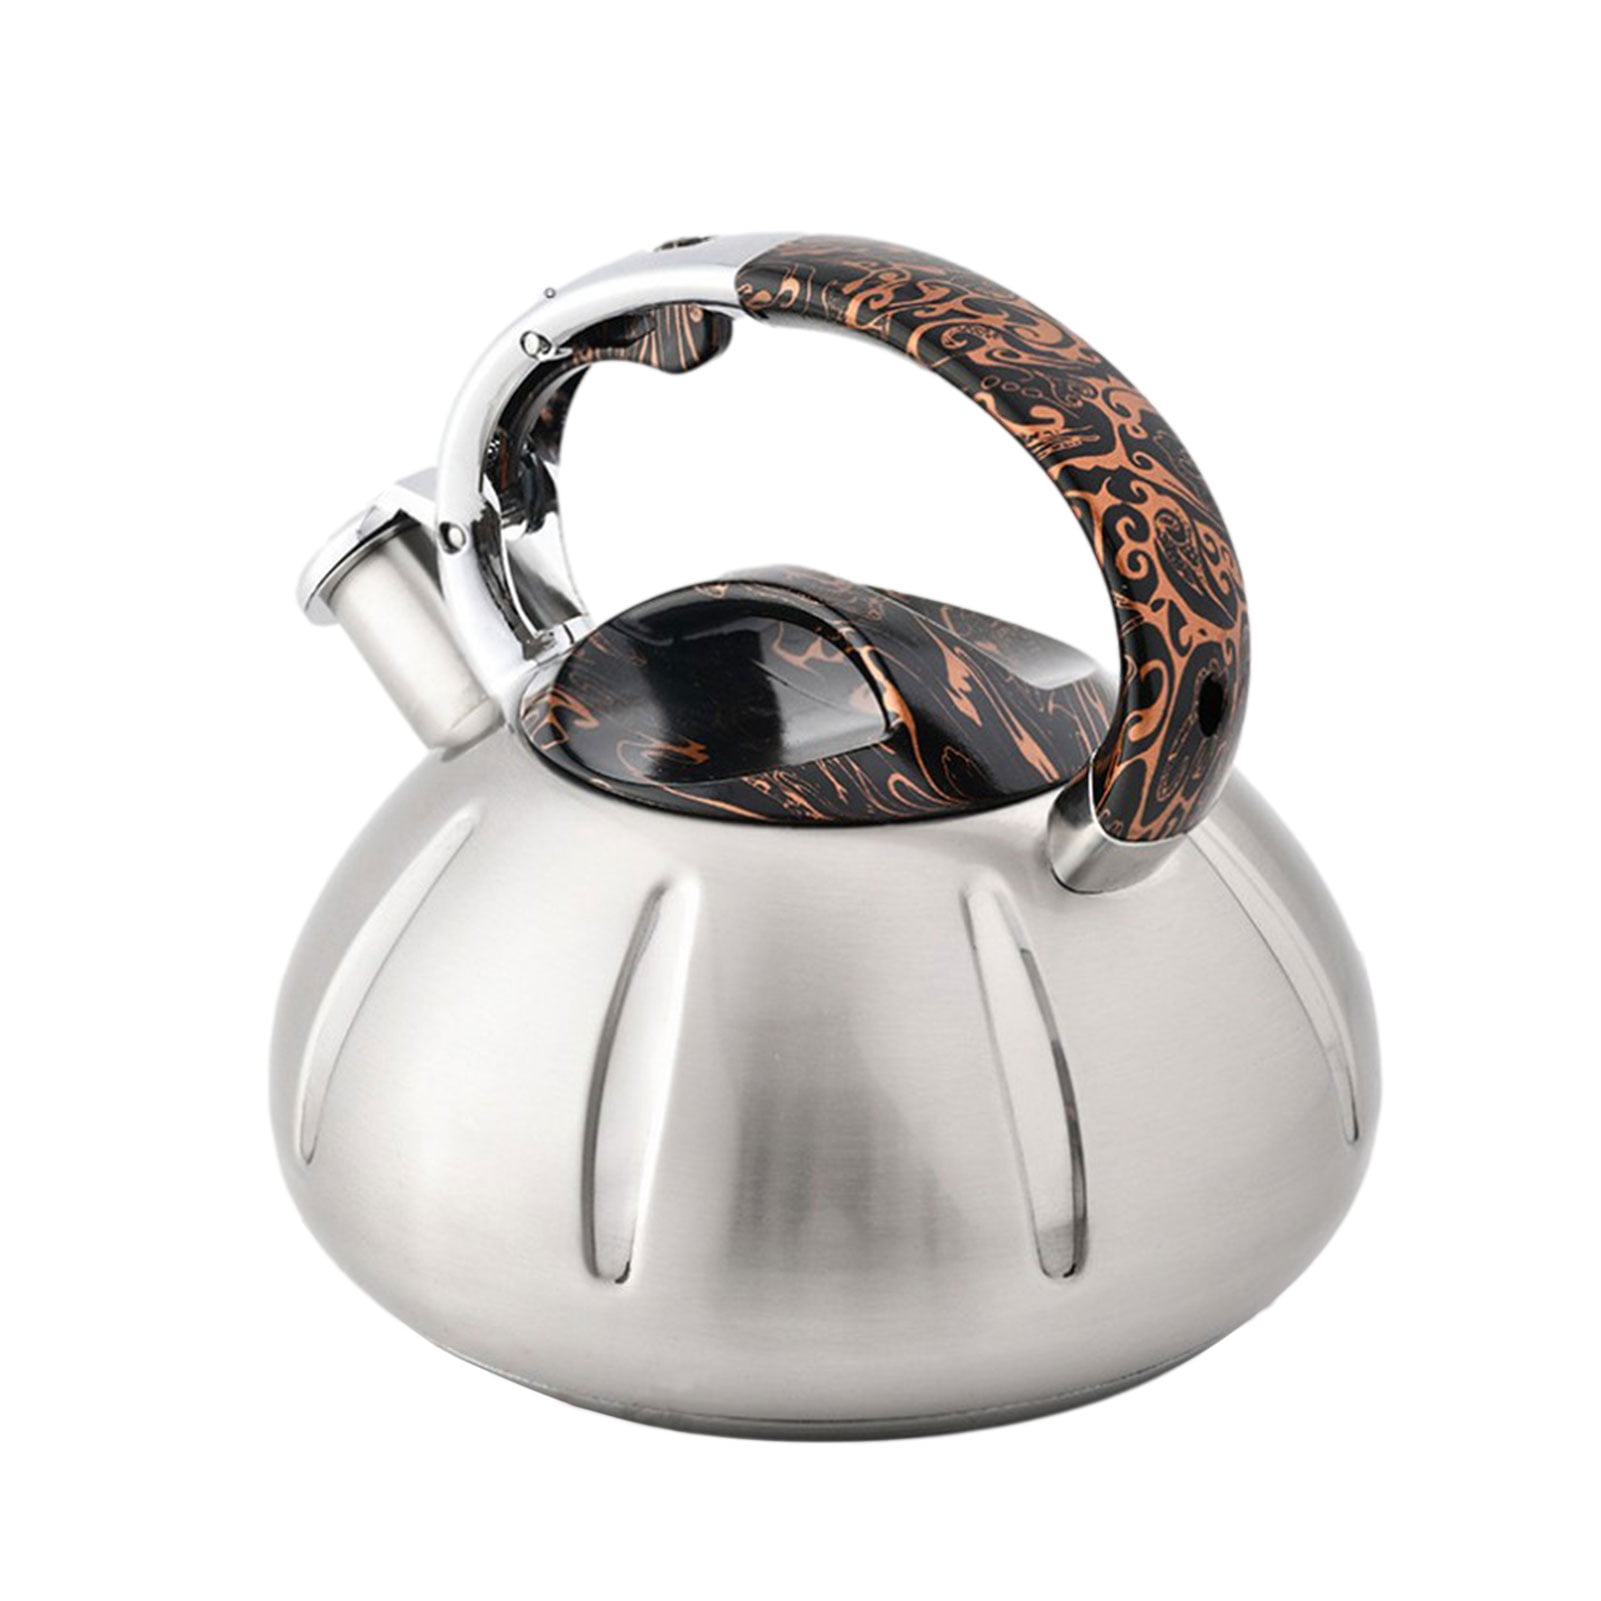 Details about   3L Stainless Steel Whistling Tea Kettle Hot Water Coffee Pot For Camping Fishing 